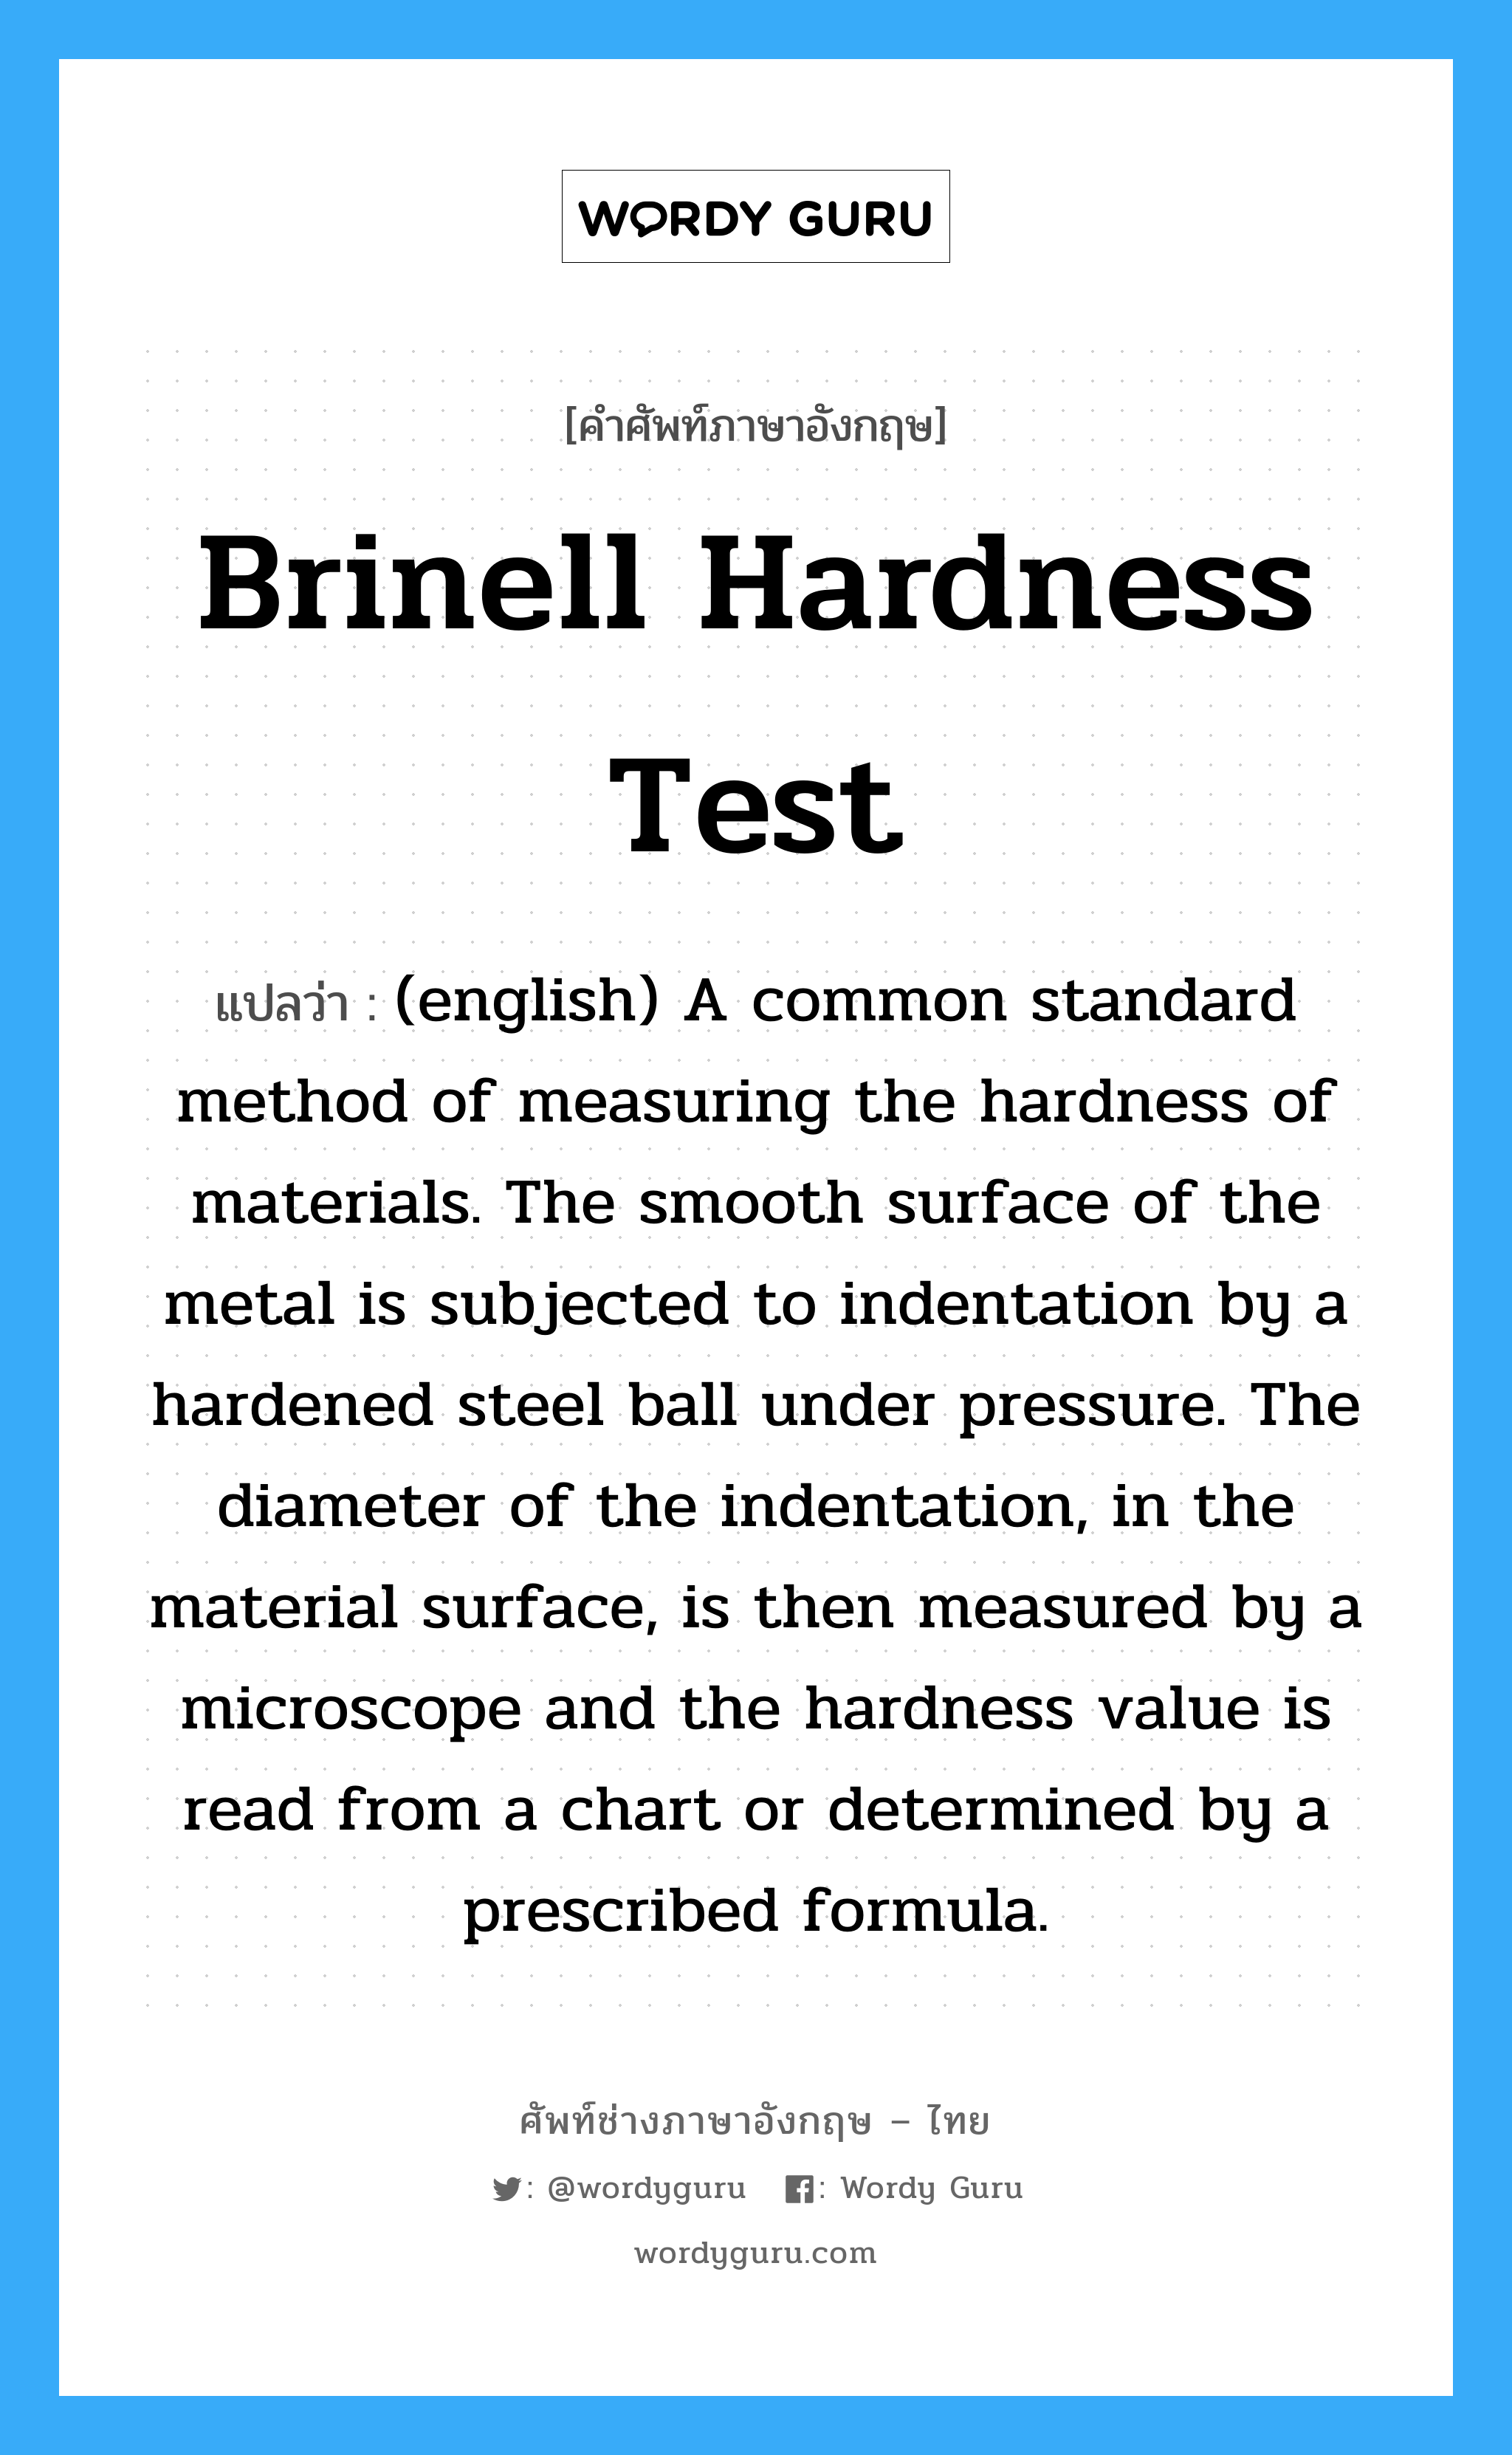 Brinell Hardness Test แปลว่า?, คำศัพท์ช่างภาษาอังกฤษ - ไทย Brinell Hardness Test คำศัพท์ภาษาอังกฤษ Brinell Hardness Test แปลว่า (english) A common standard method of measuring the hardness of materials. The smooth surface of the metal is subjected to indentation by a hardened steel ball under pressure. The diameter of the indentation, in the material surface, is then measured by a microscope and the hardness value is read from a chart or determined by a prescribed formula.